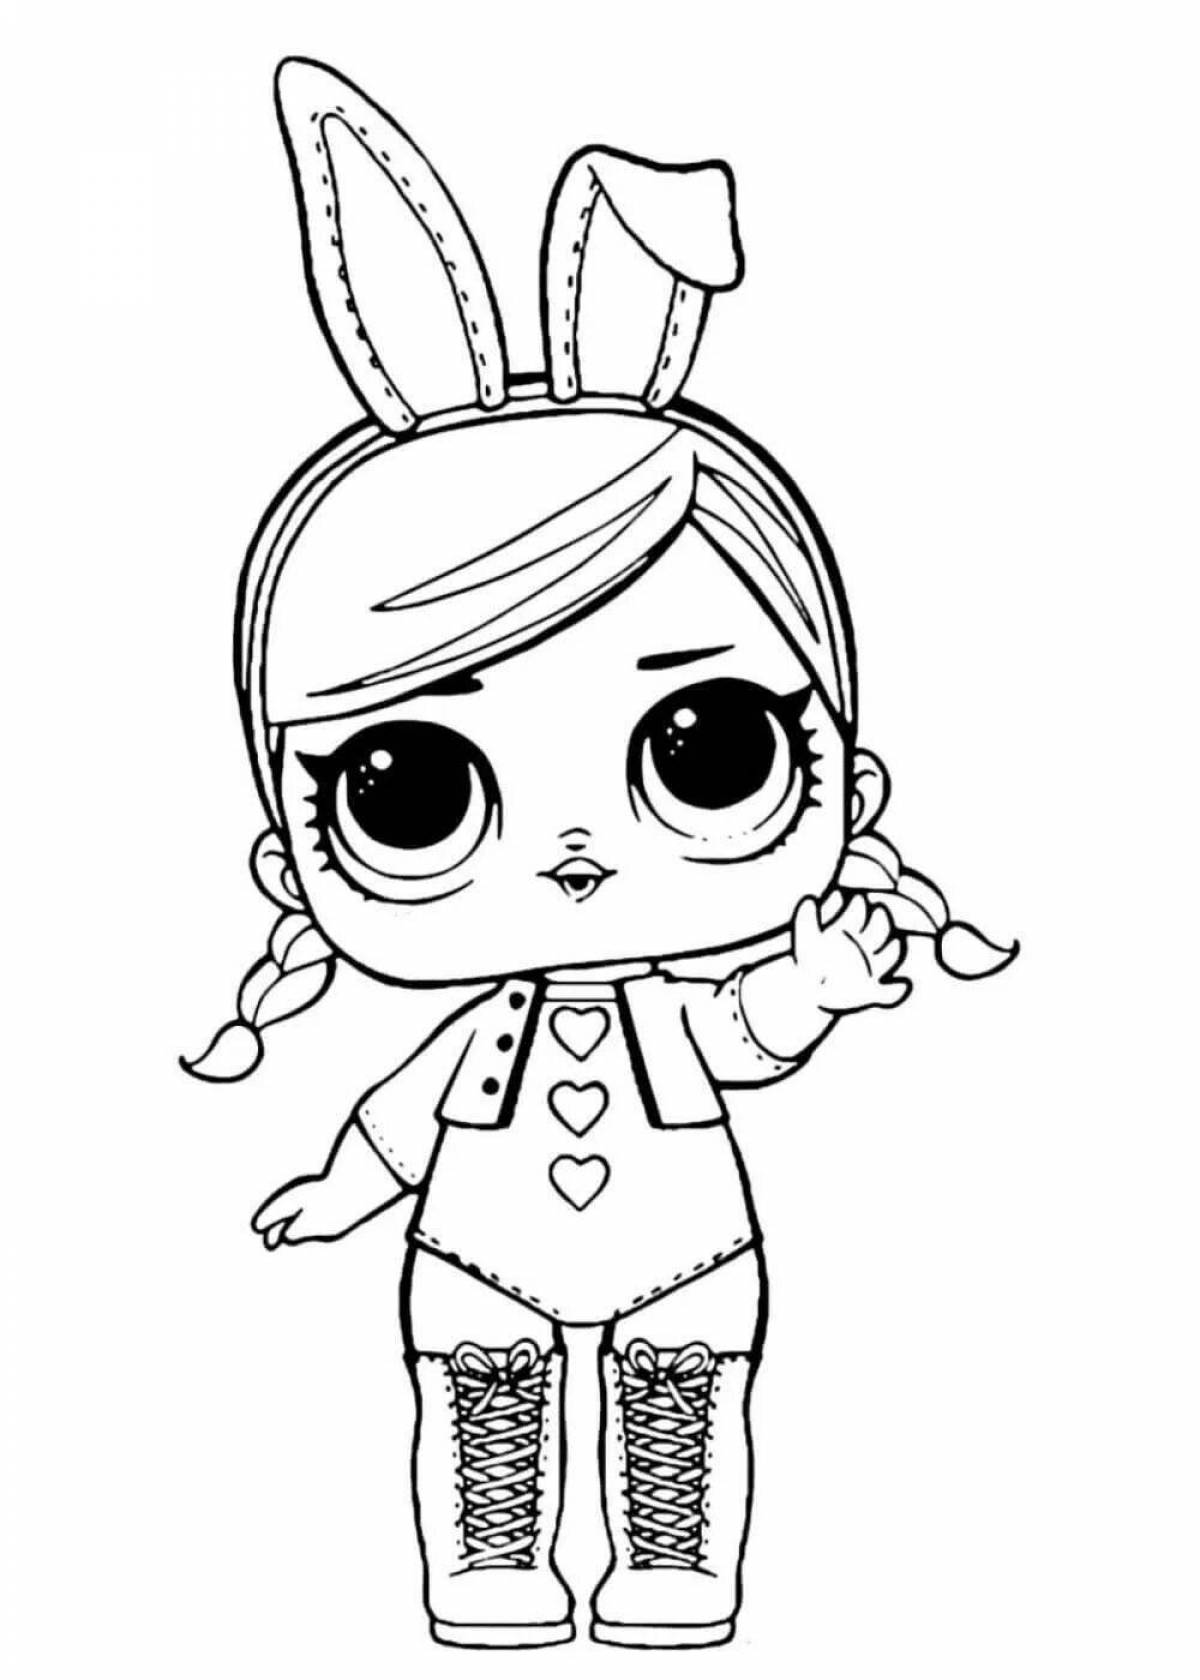 Fairy lol coloring page